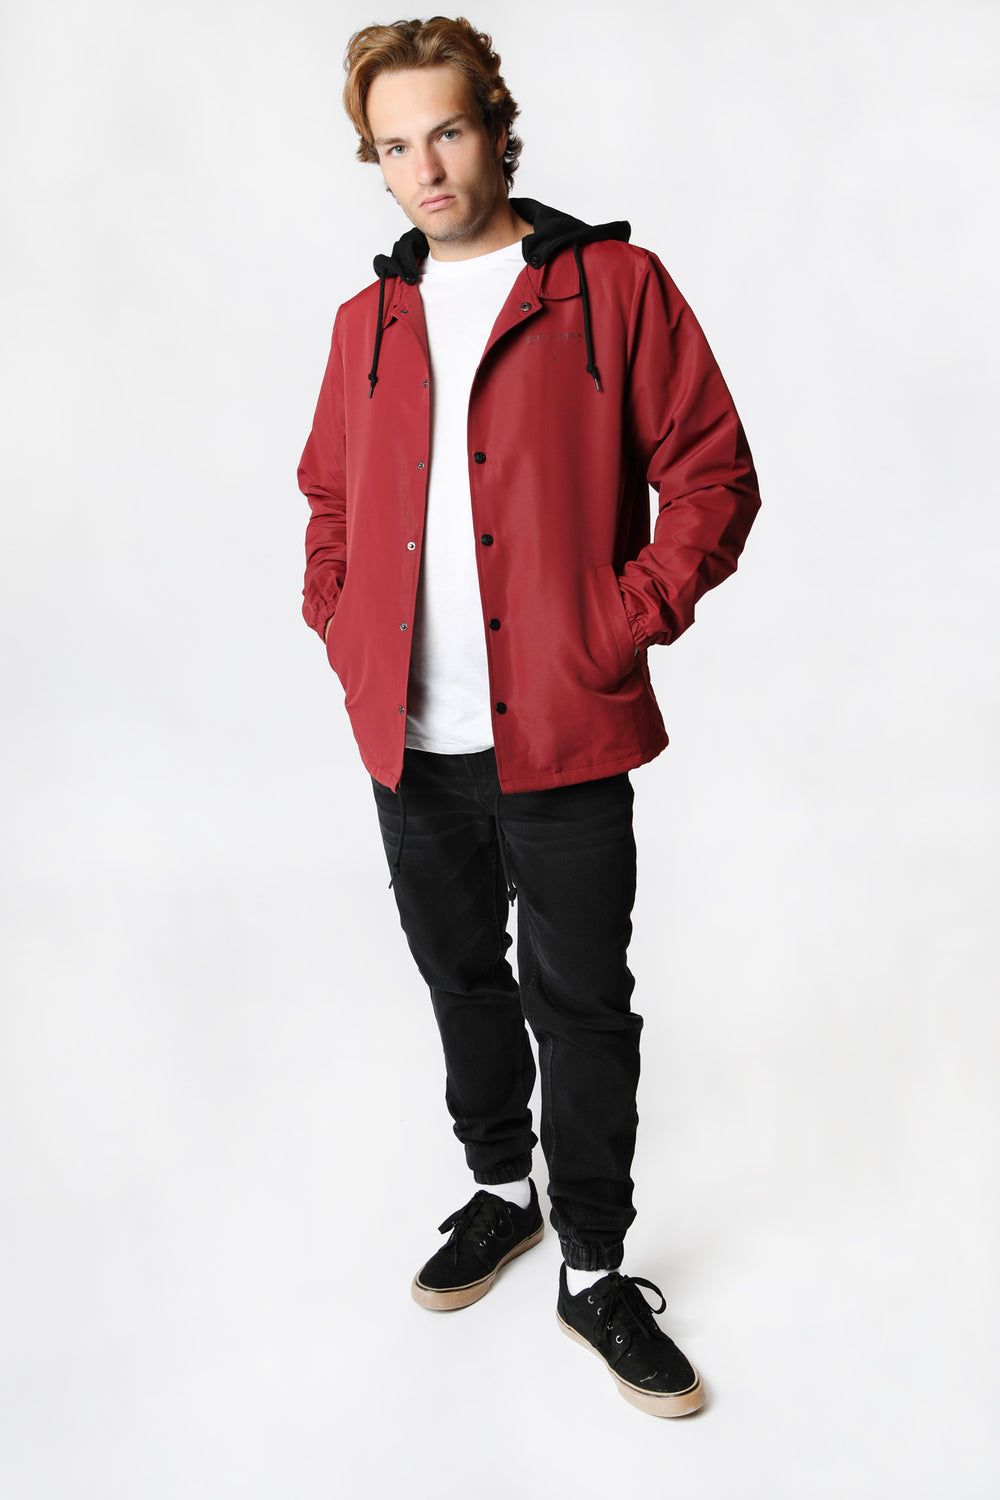 Zoo York Mens Coach Jacket Red